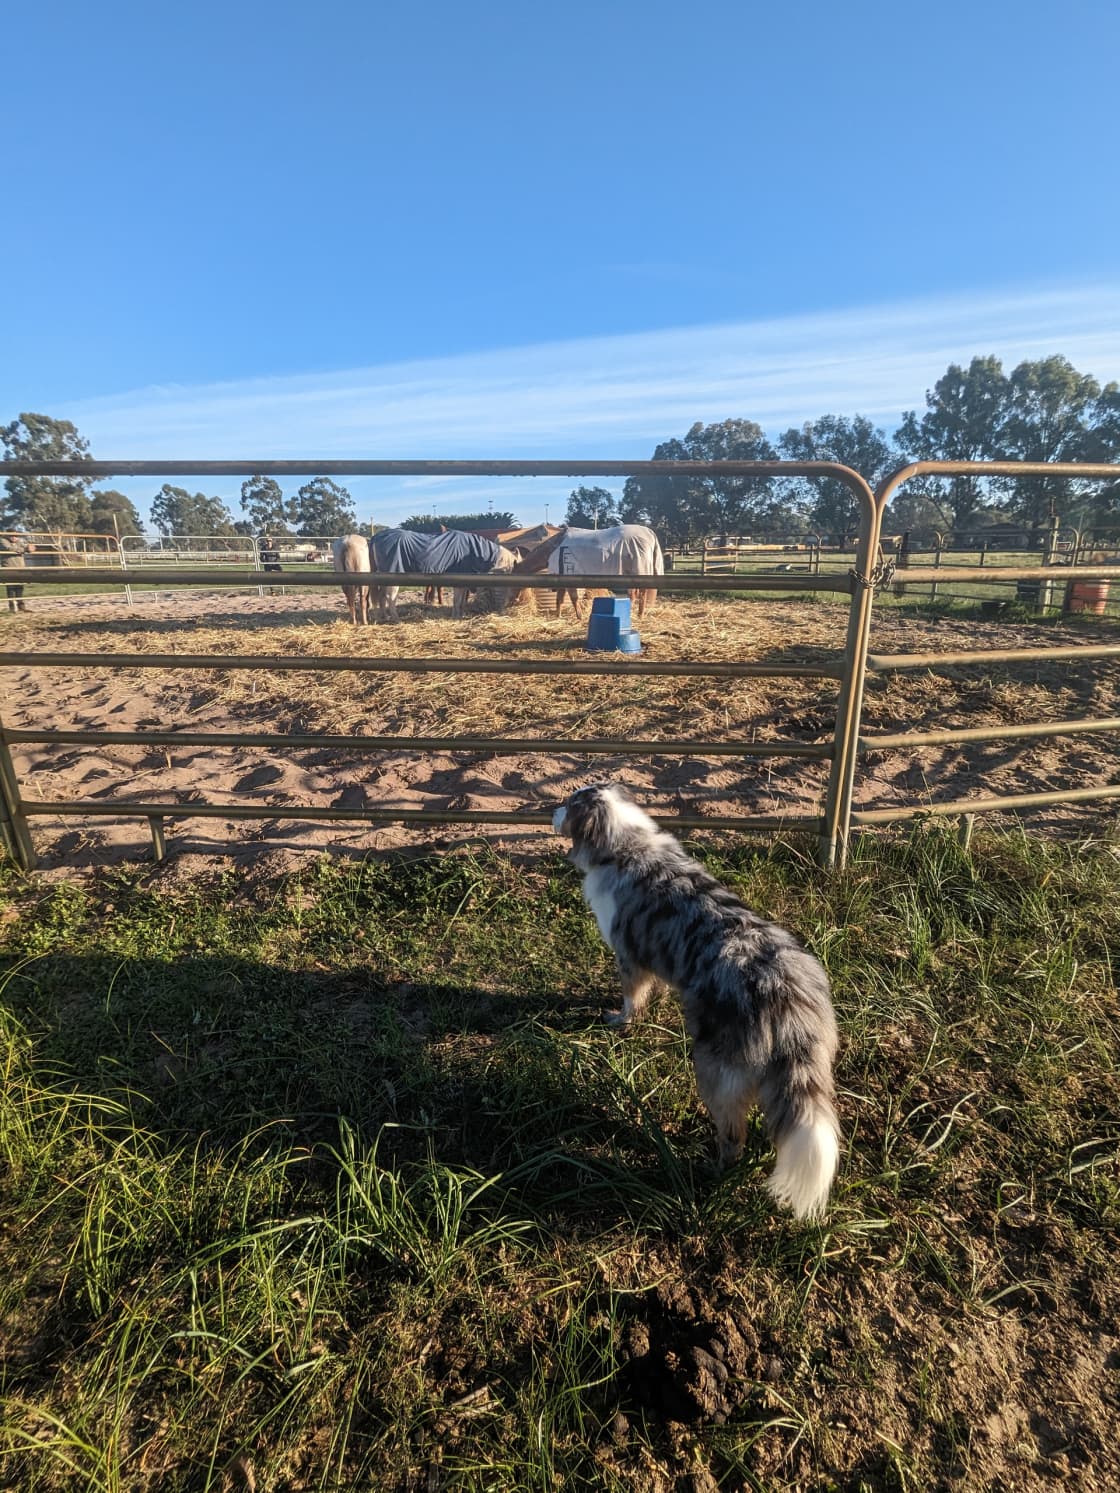 The dog checking out the horses feeding 